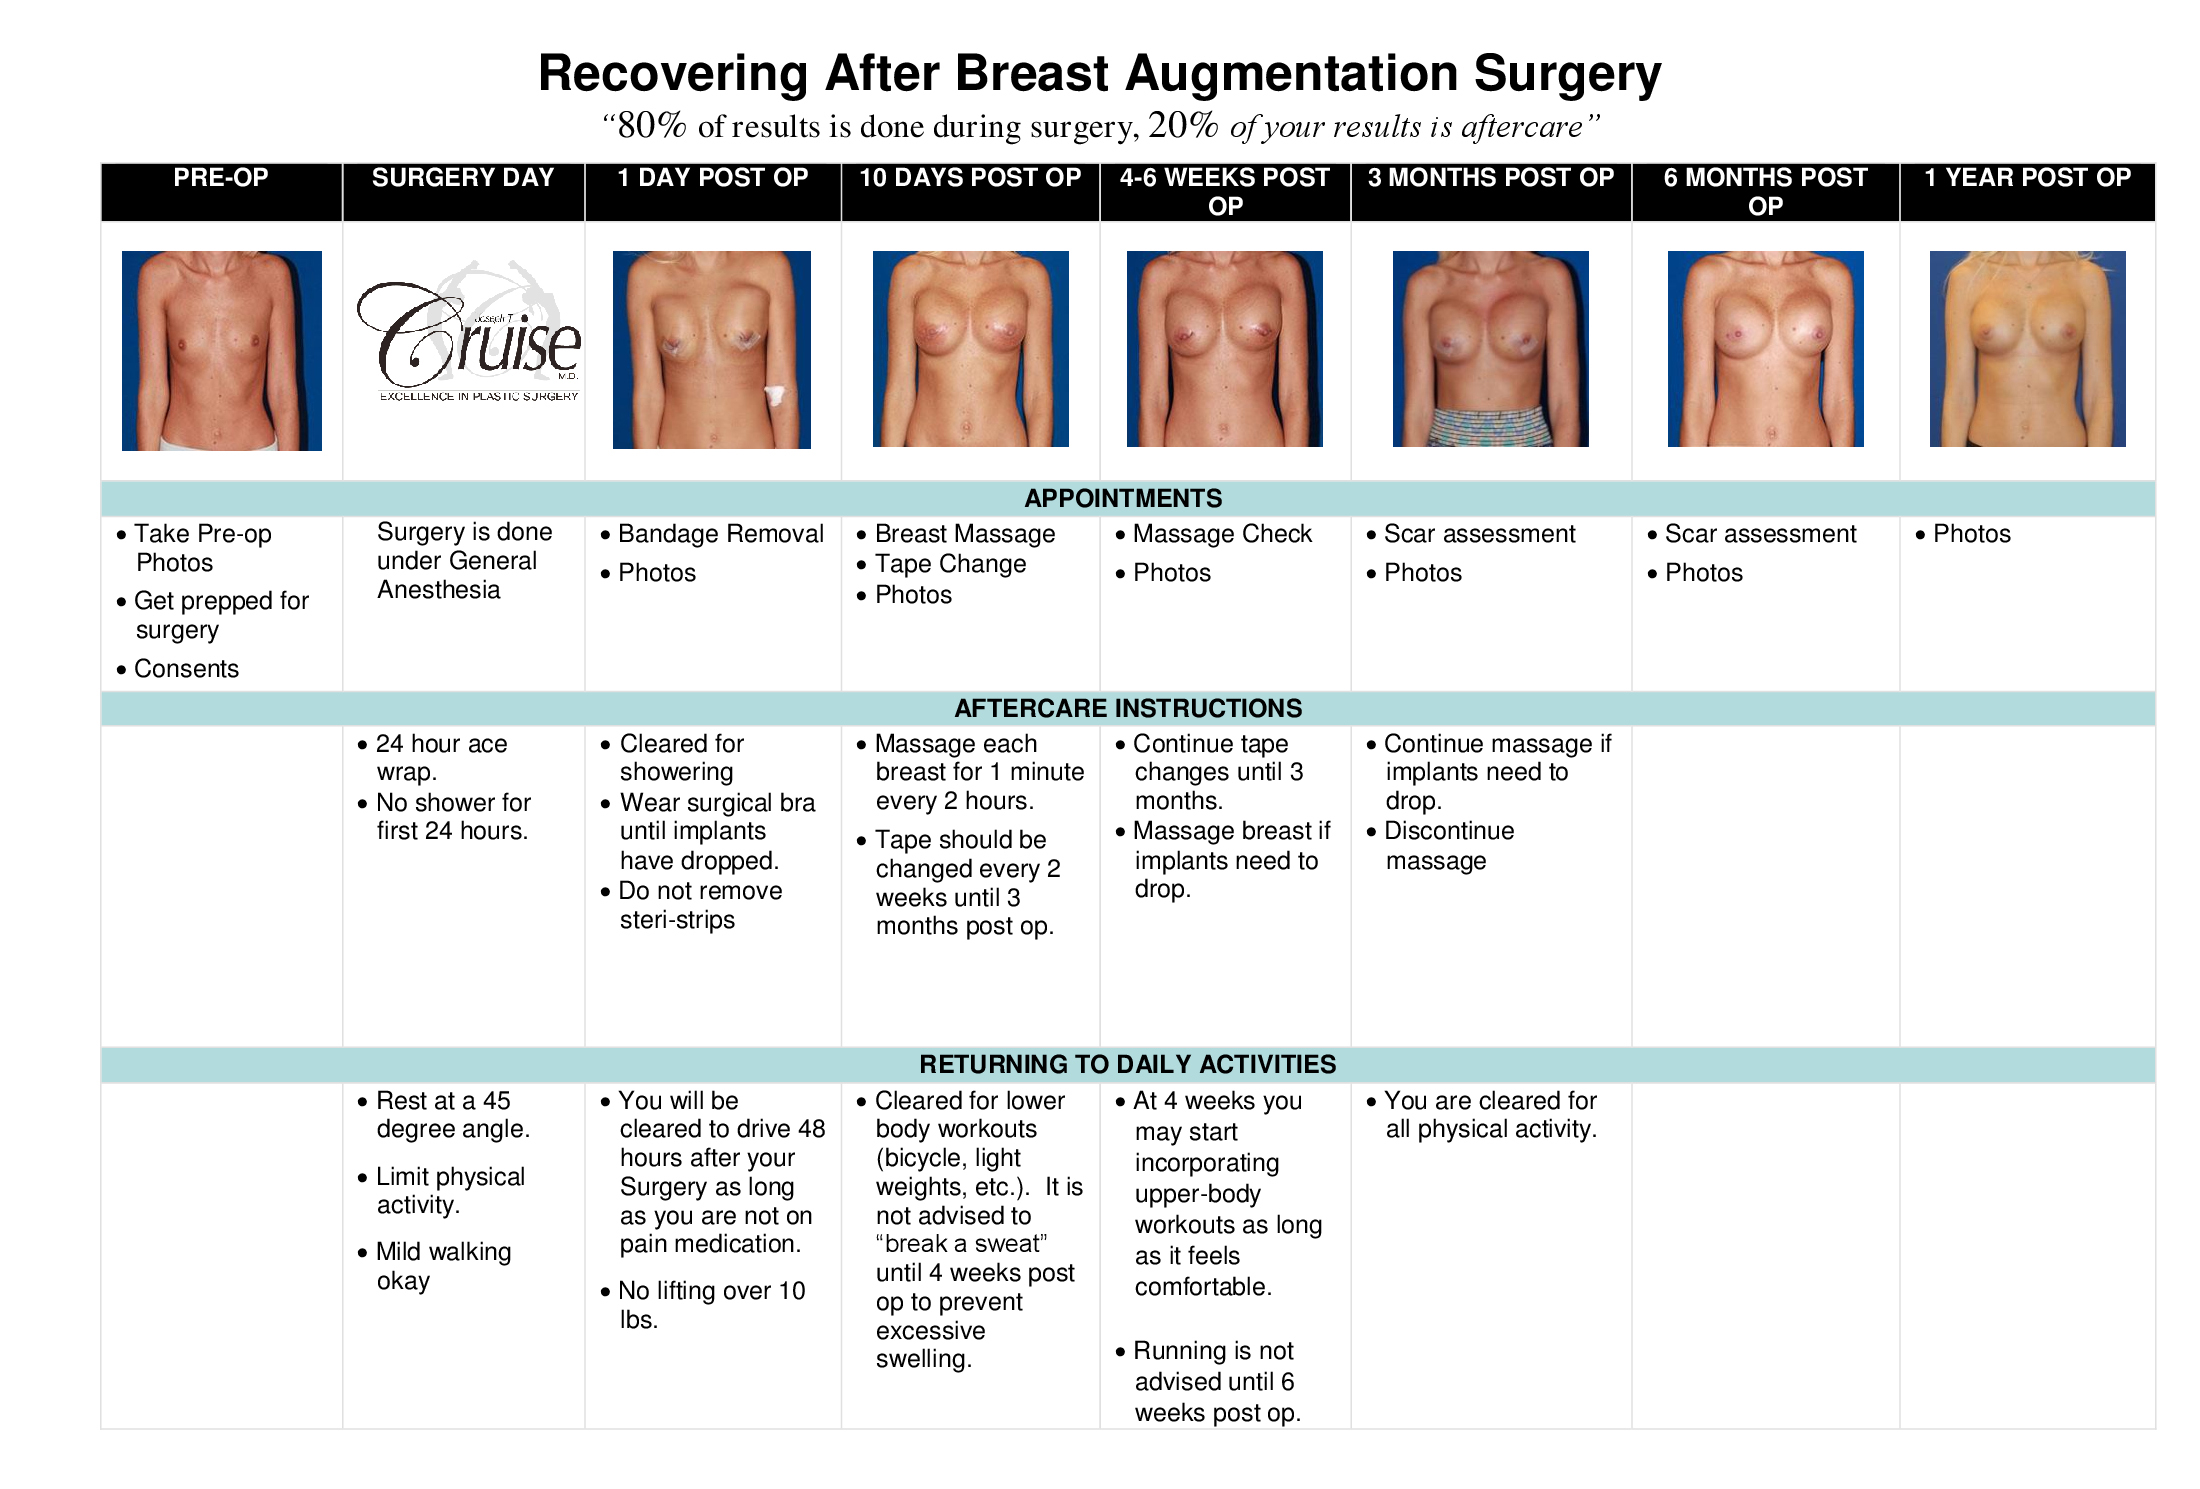 Breast Lift Recovery - Tips, Timeline, & What To Expect